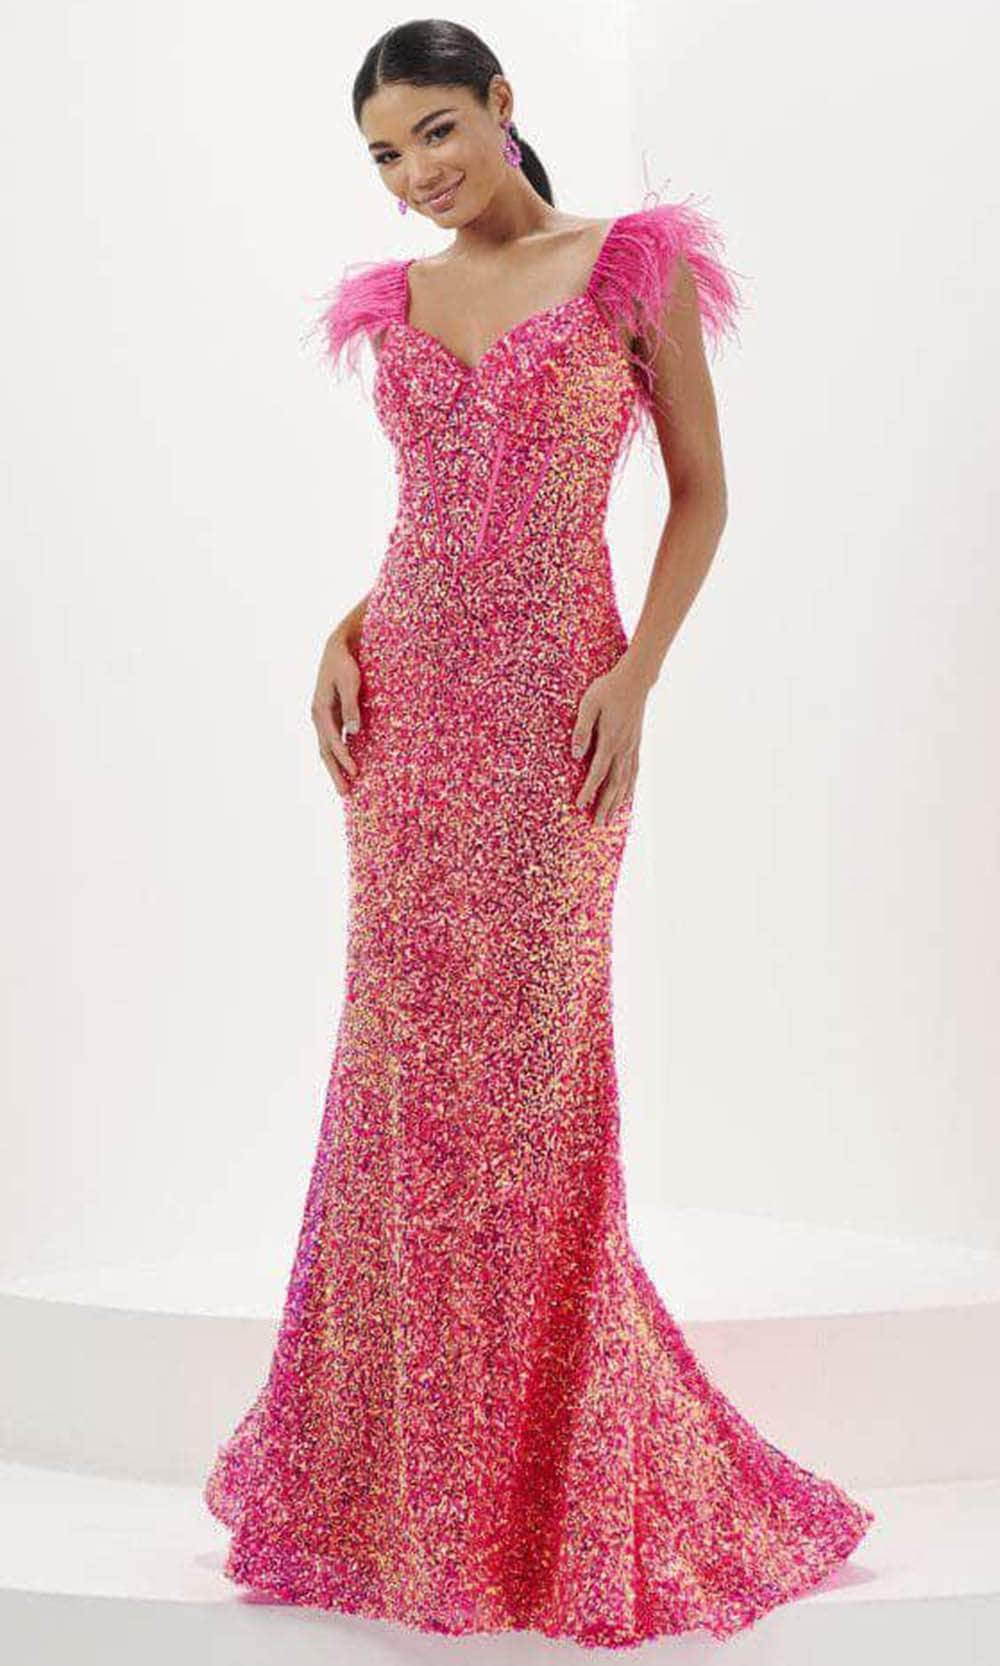 Tiffany Designs 16106 - Sweetheart Feather Sleeve Evening Gown Evening Dresses 0 / Hot Pink